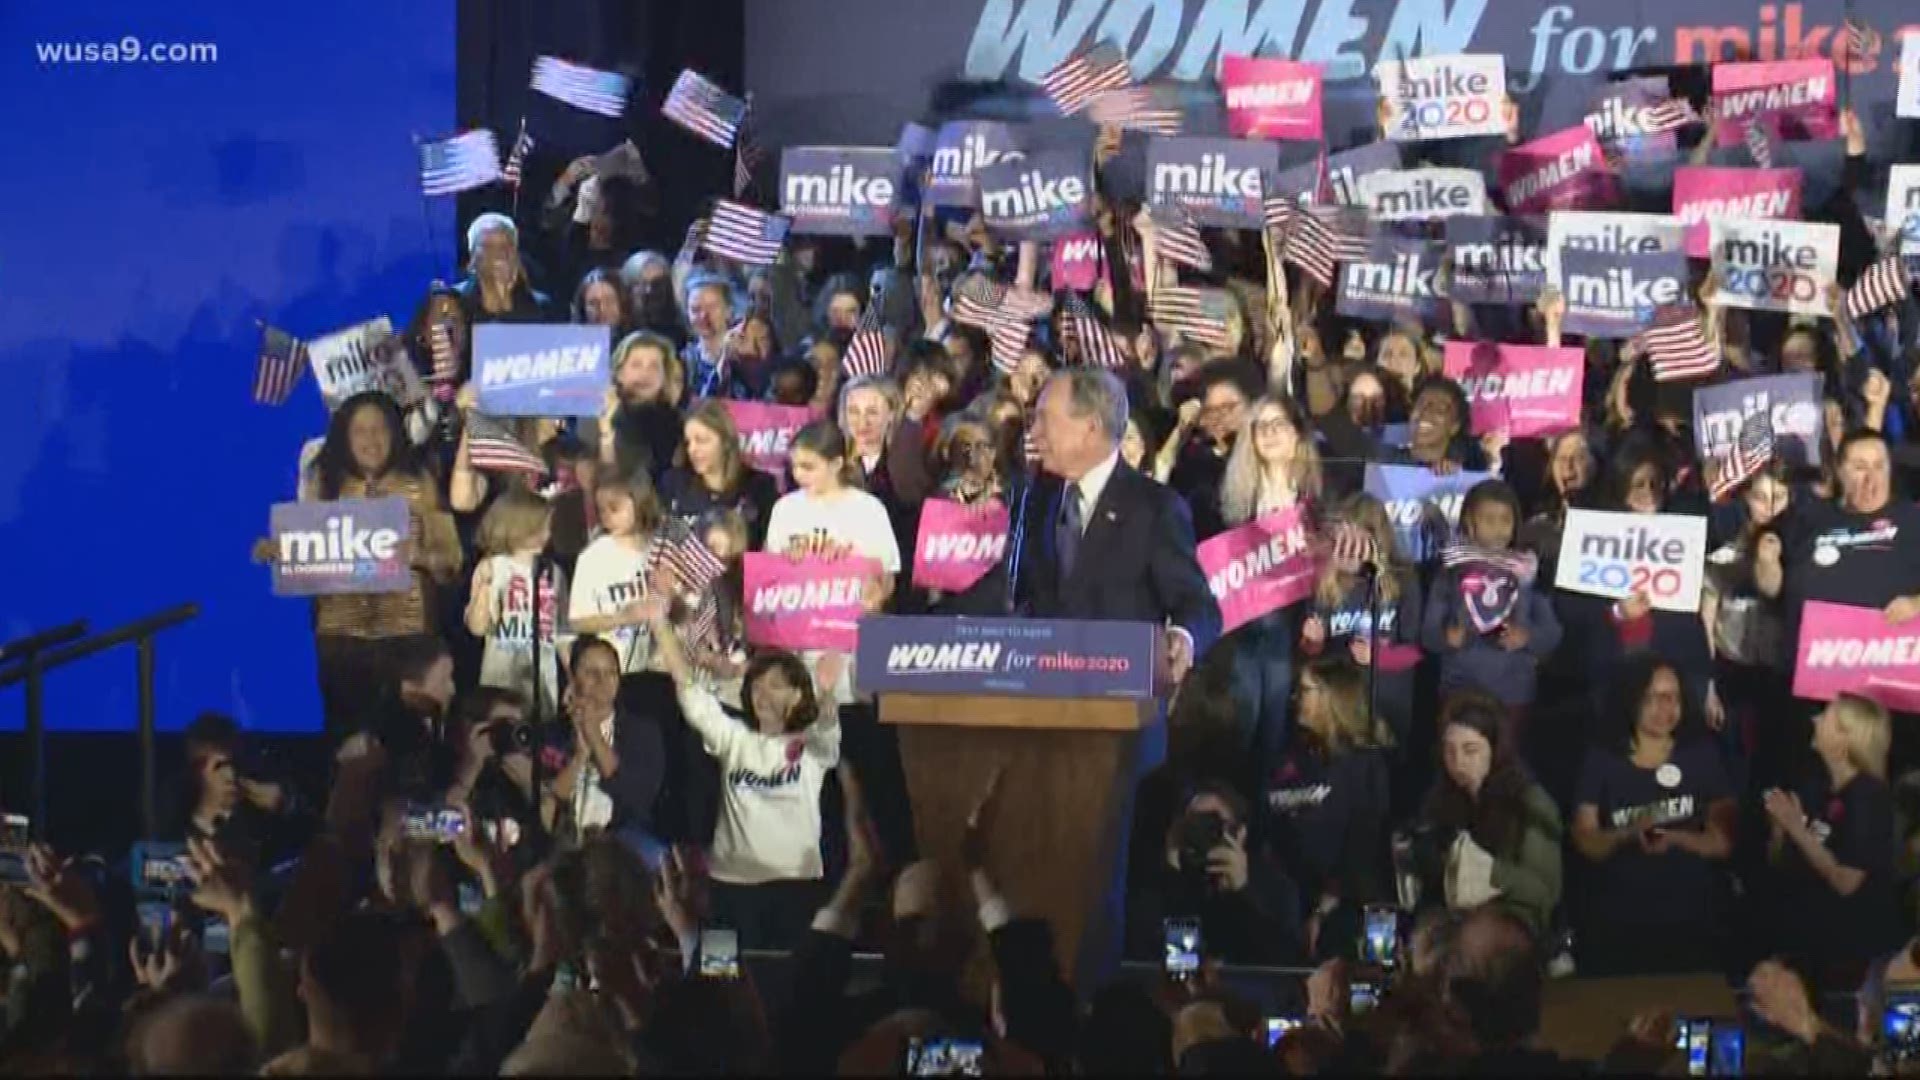 Ahead of Super Tuesday, Michael Bloomberg is campaigning in Virginia, hoping to rally support.